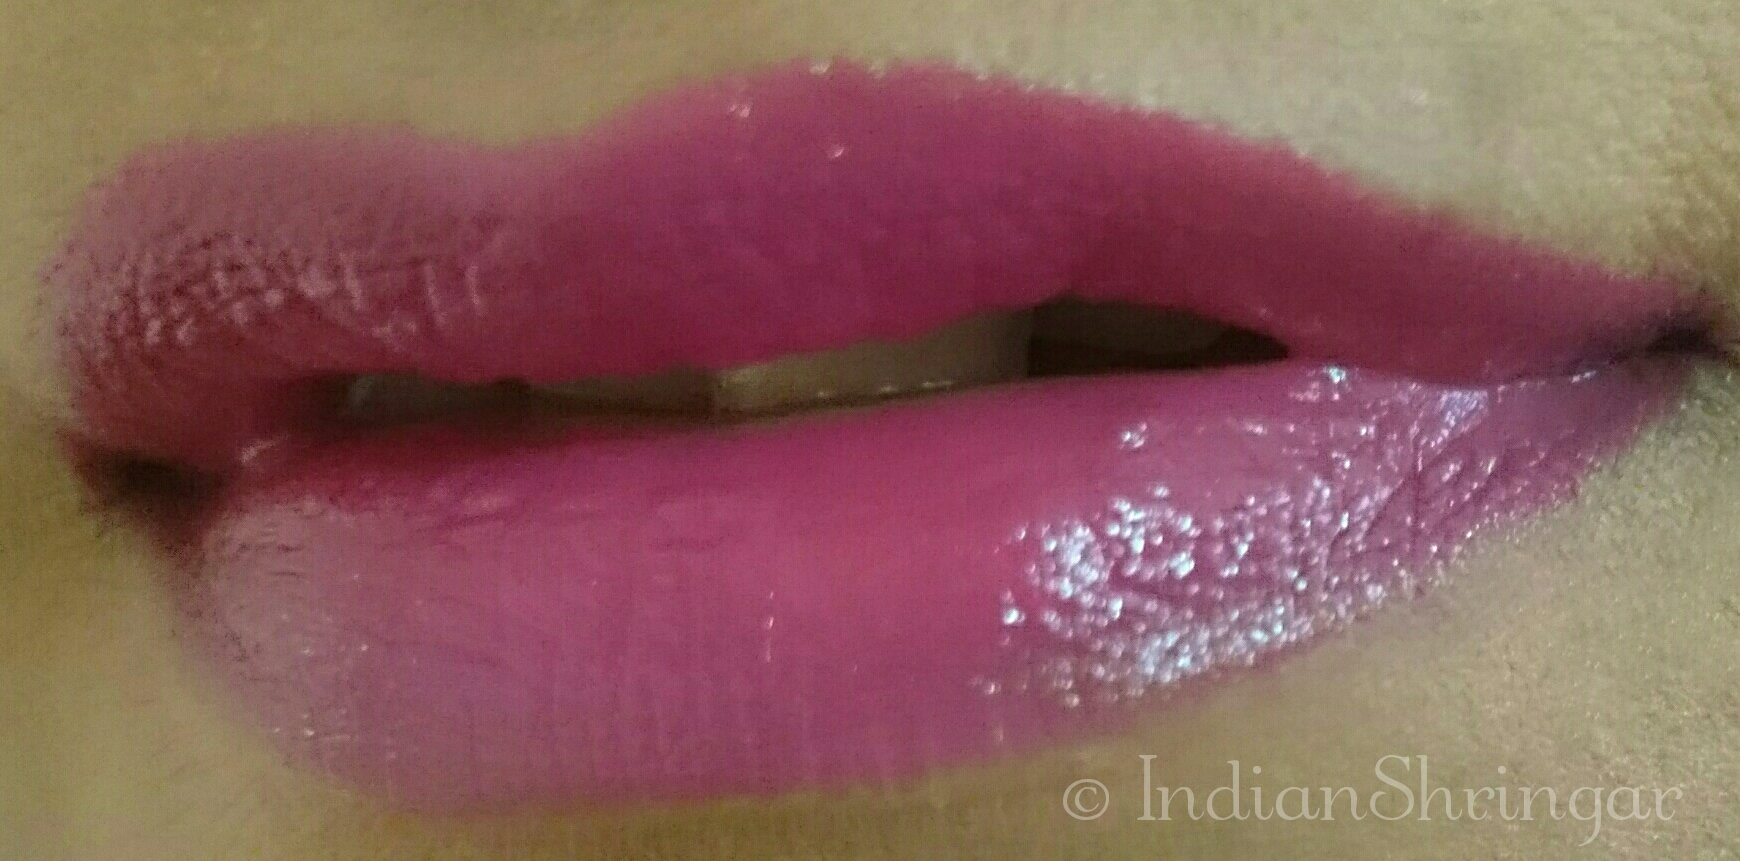 Bobbi Brown Sheer Lip Color Hot Raspberry review, swatch, price in India